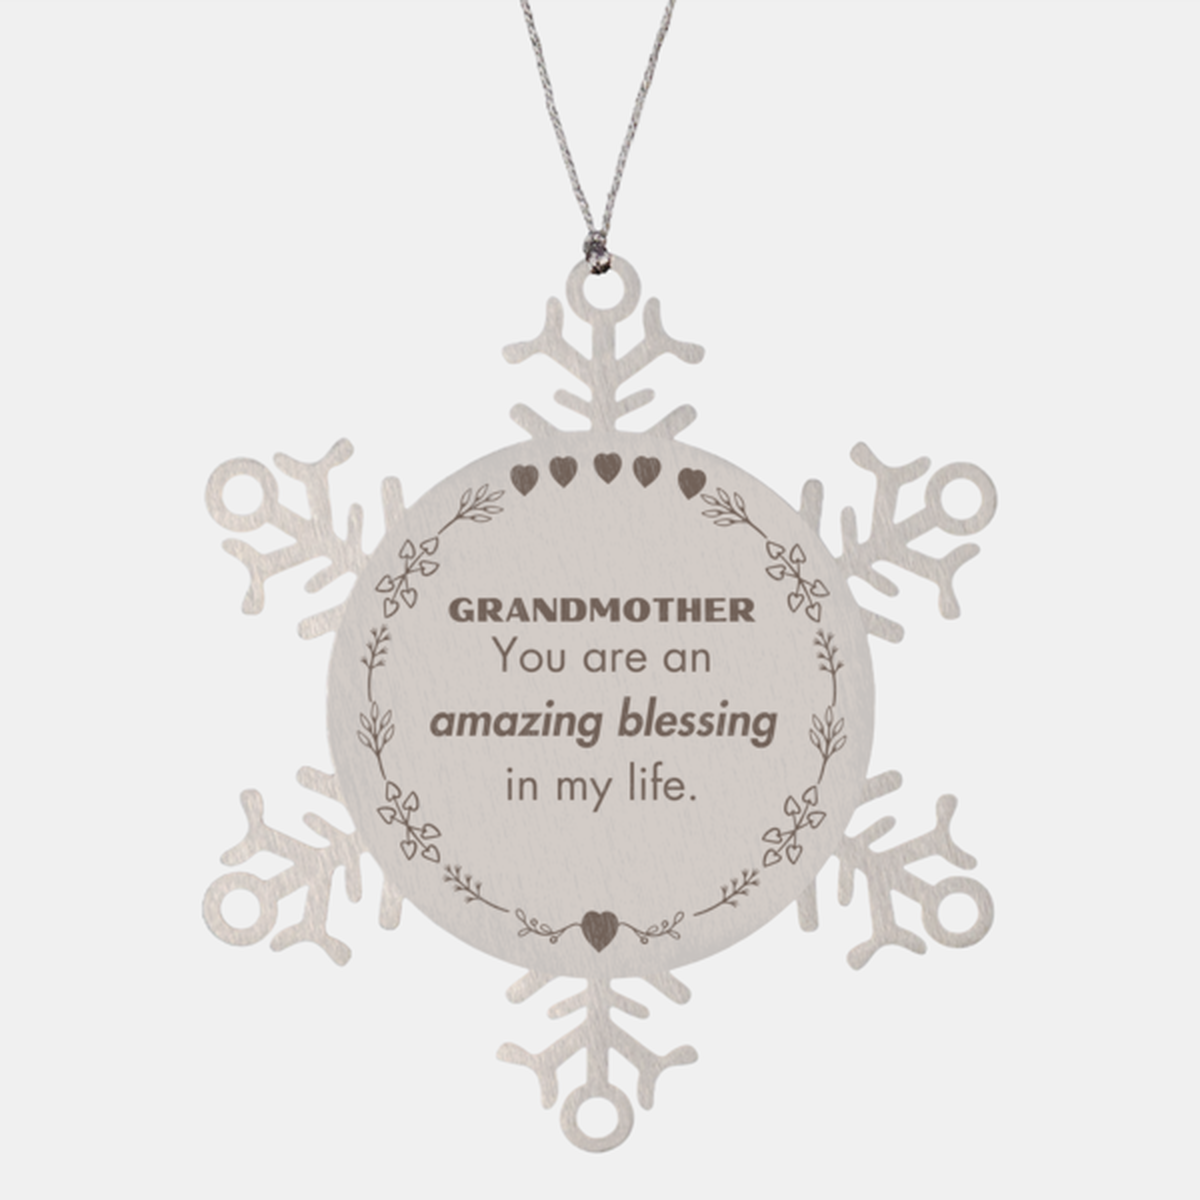 Grandmother Snowflake Ornament, You are an amazing blessing in my life, Thank You Gifts For Grandmother, Inspirational Birthday Christmas Unique Gifts For Grandmother